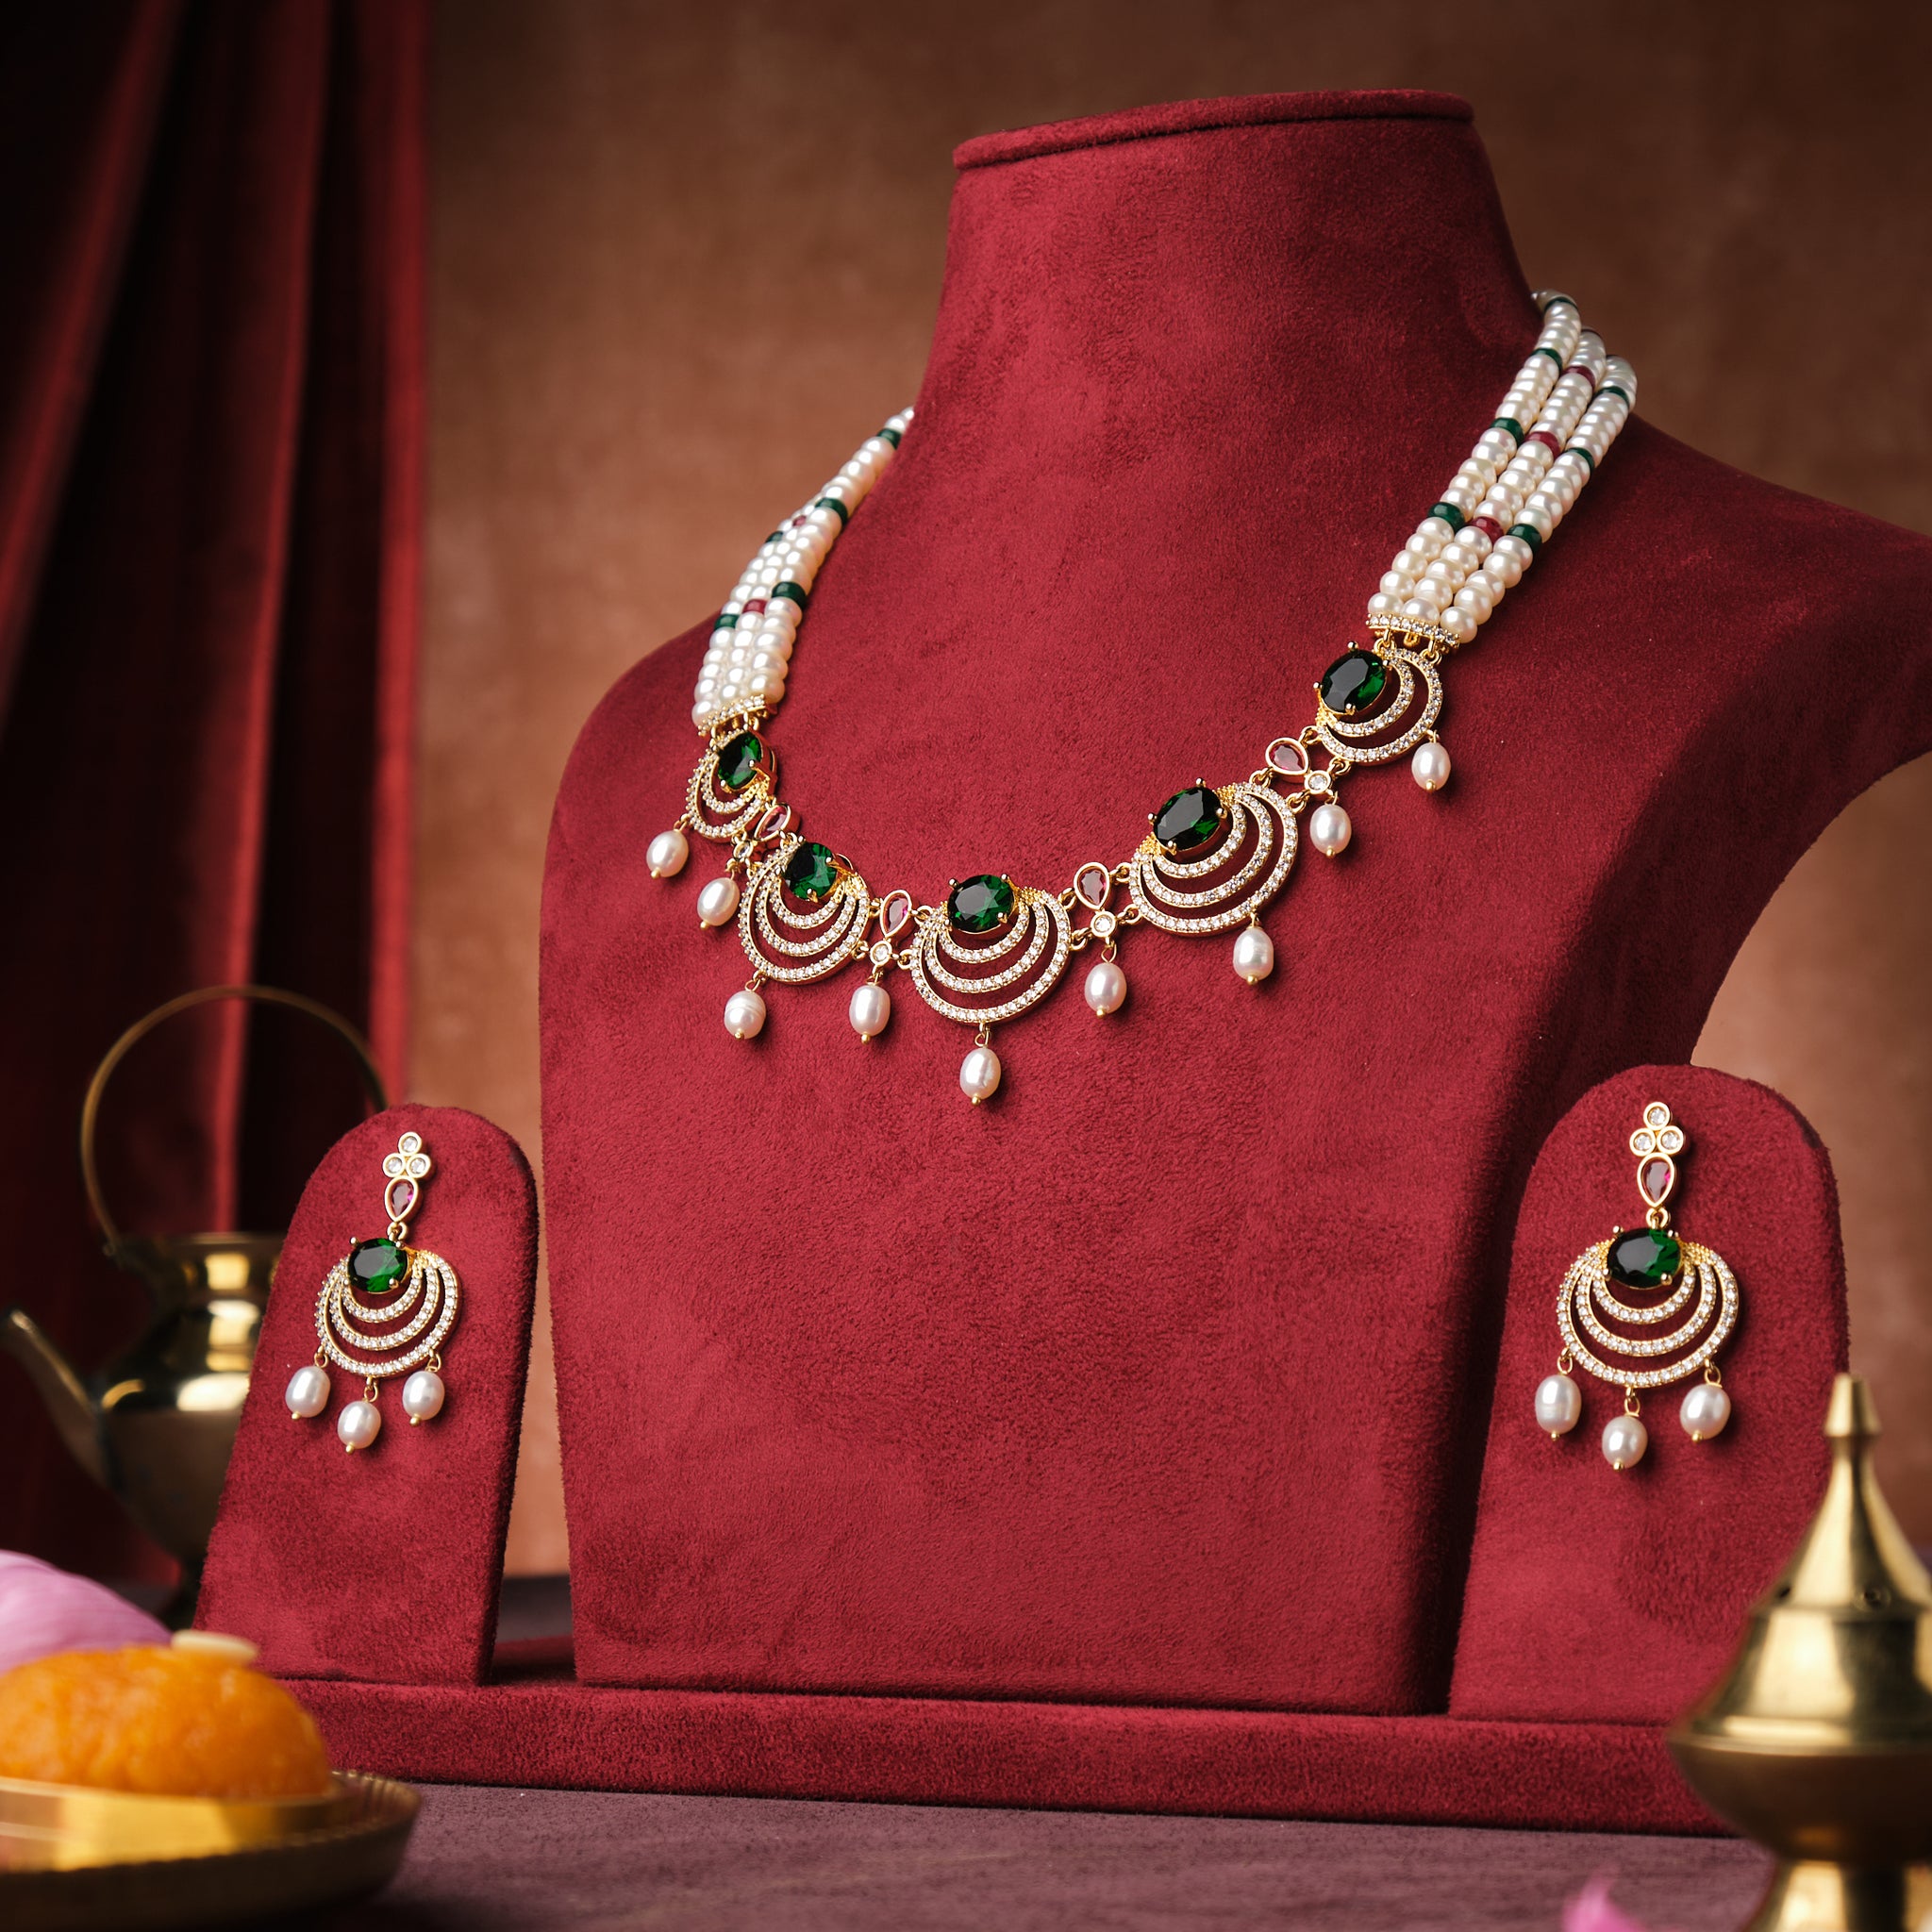 Elegant Glorious CZ Pendant Pearl Necklace Set displayed on a velvet bust with cultural ornaments and decorations by Chandrani Pearls India.